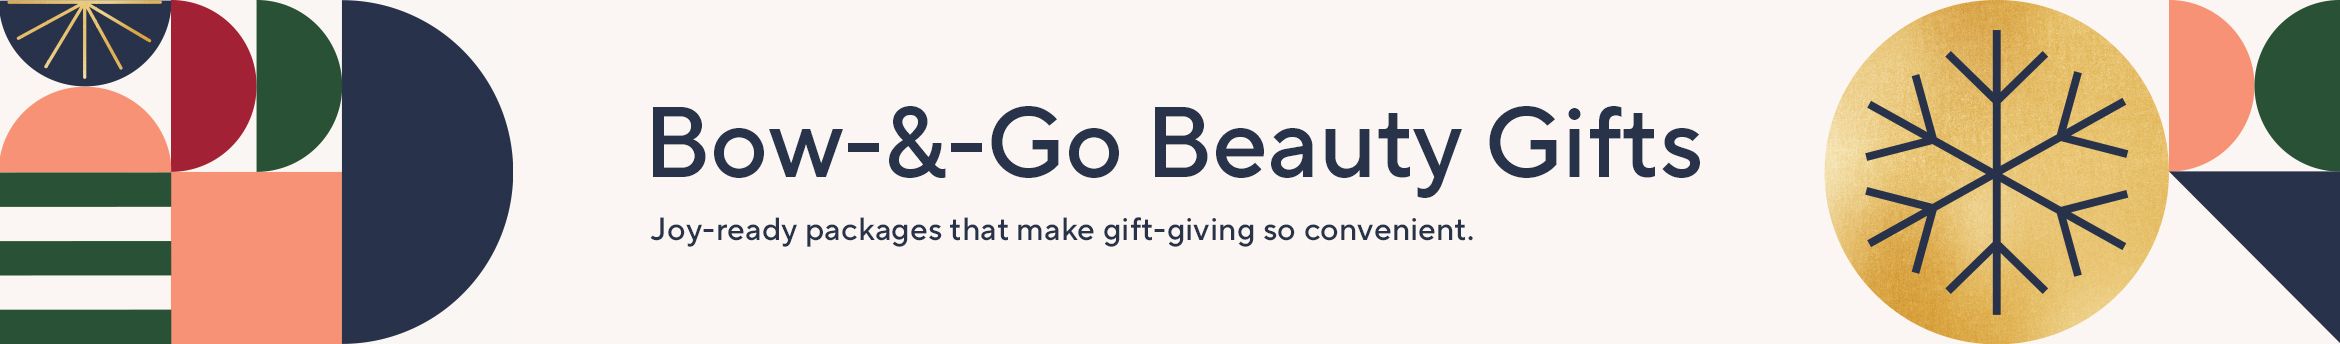 Bow-&-Go Beauty Gifts -  Joy-ready packages that make gift-giving so convenient. 